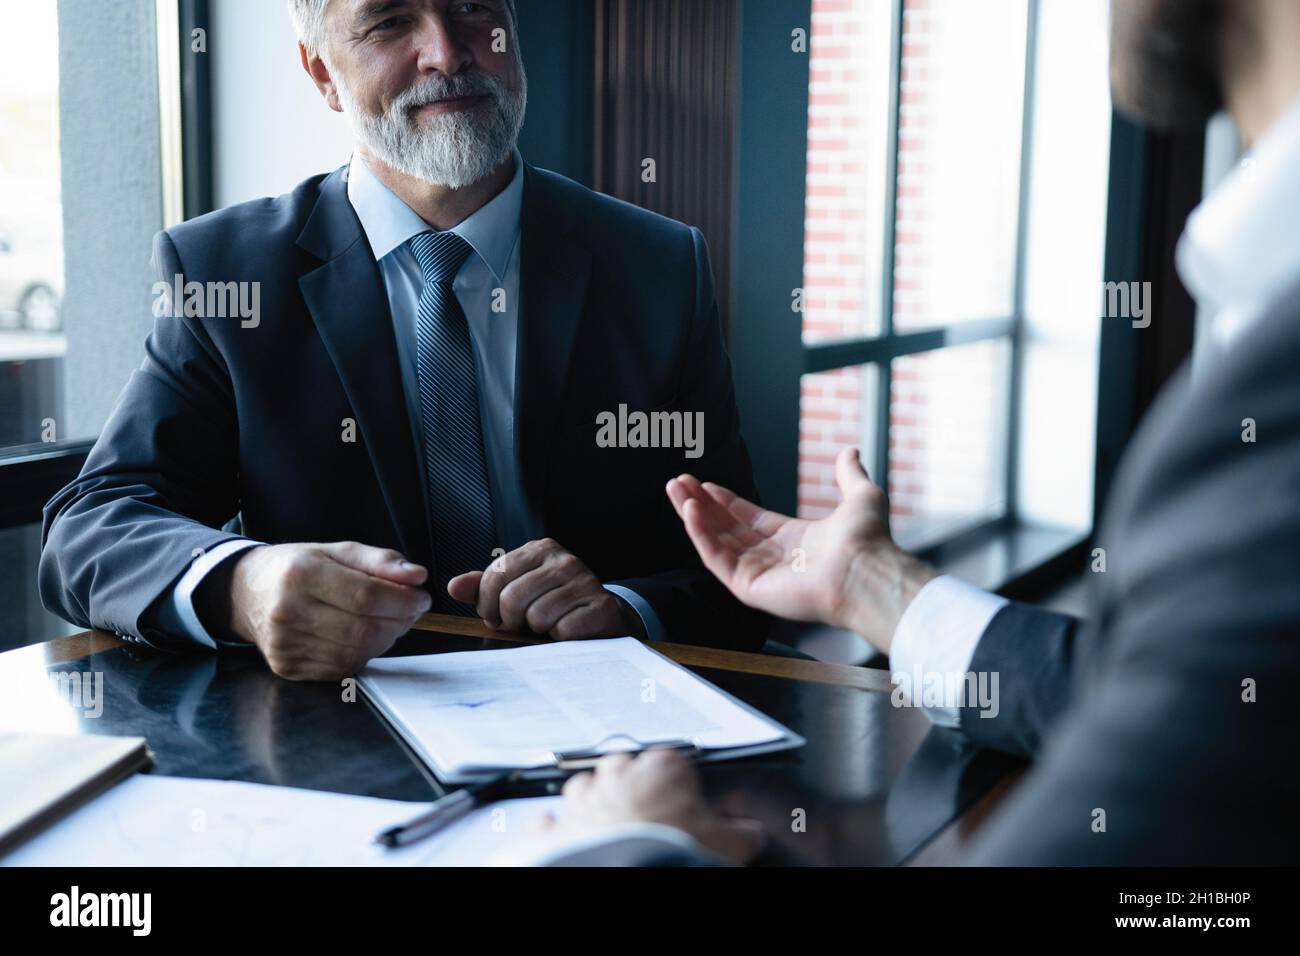 Senior and junior businessman discuss something during their meeting, office background. Stock Photo